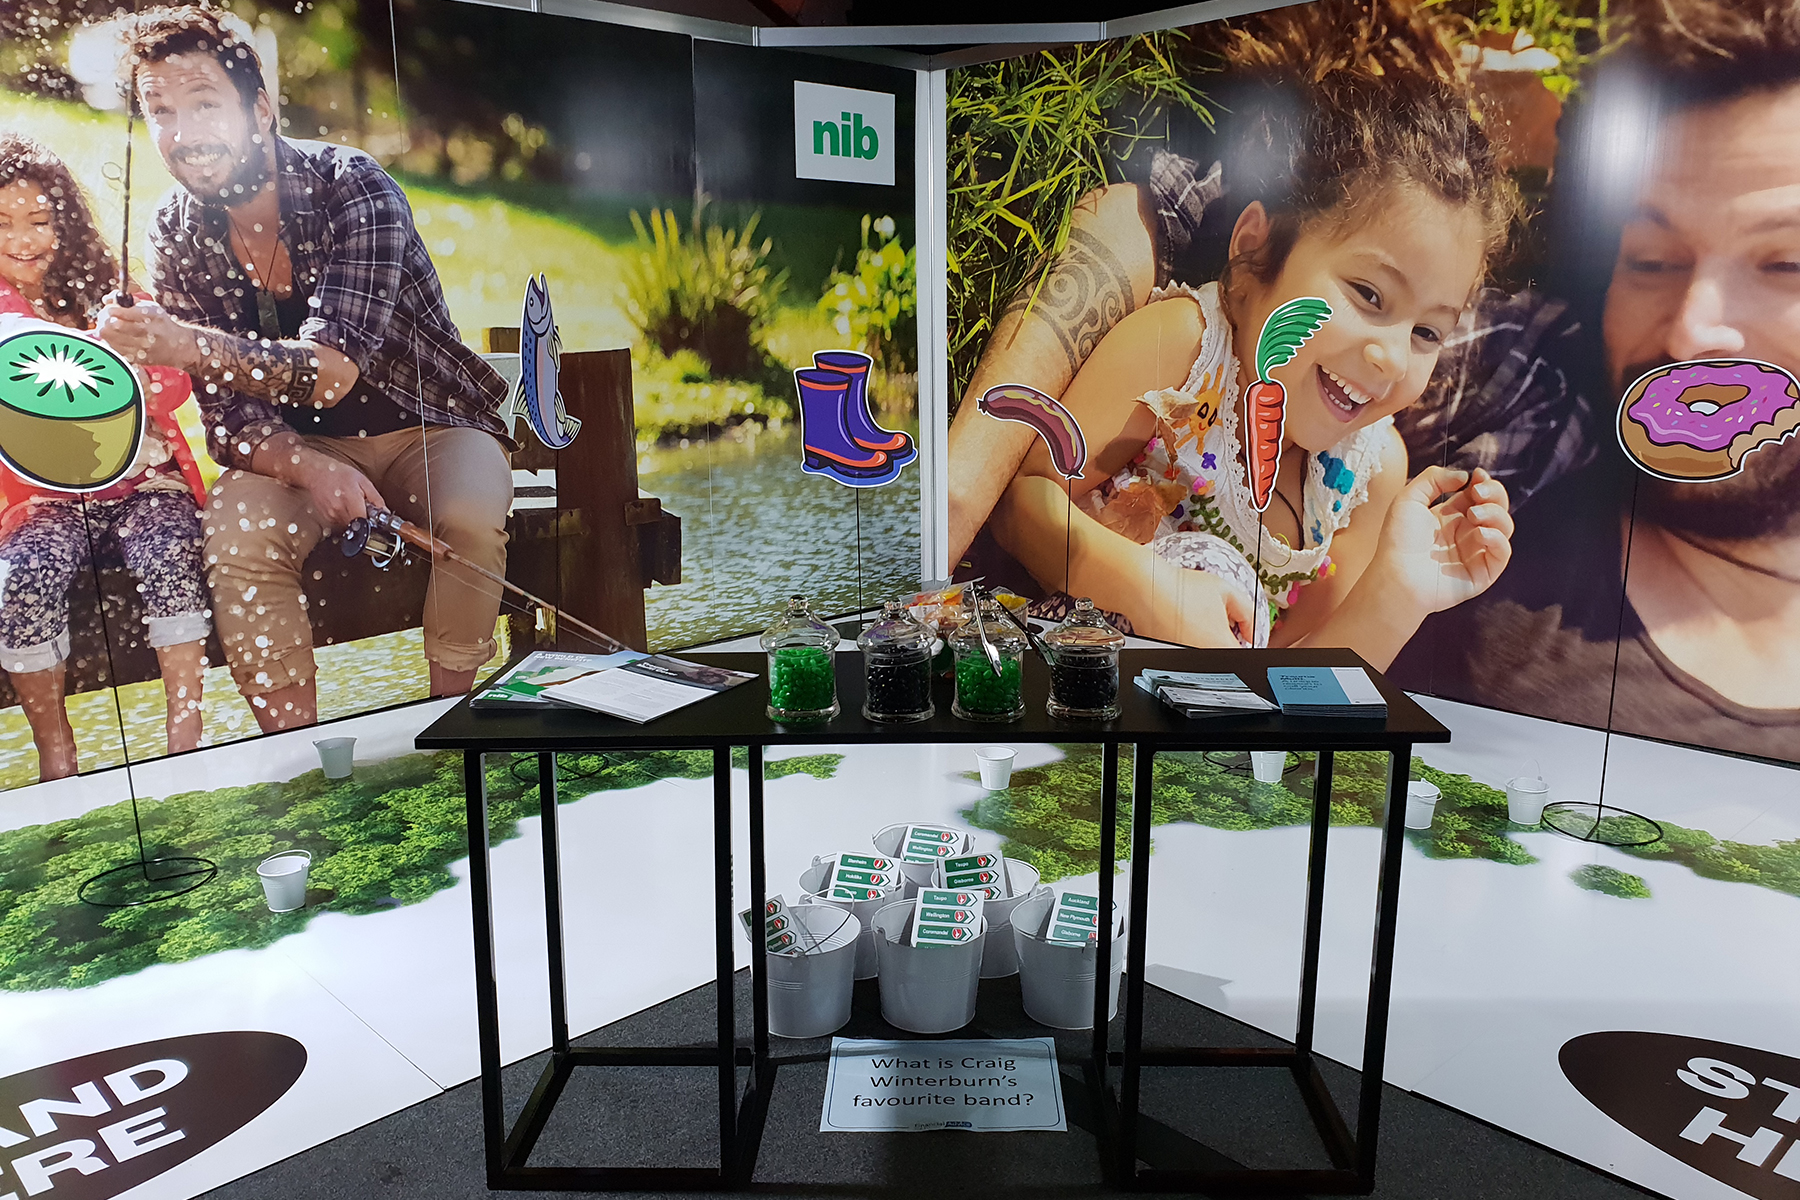 Exhibition Design ... Fidelity Life and nib, National Advisors Conference 2018